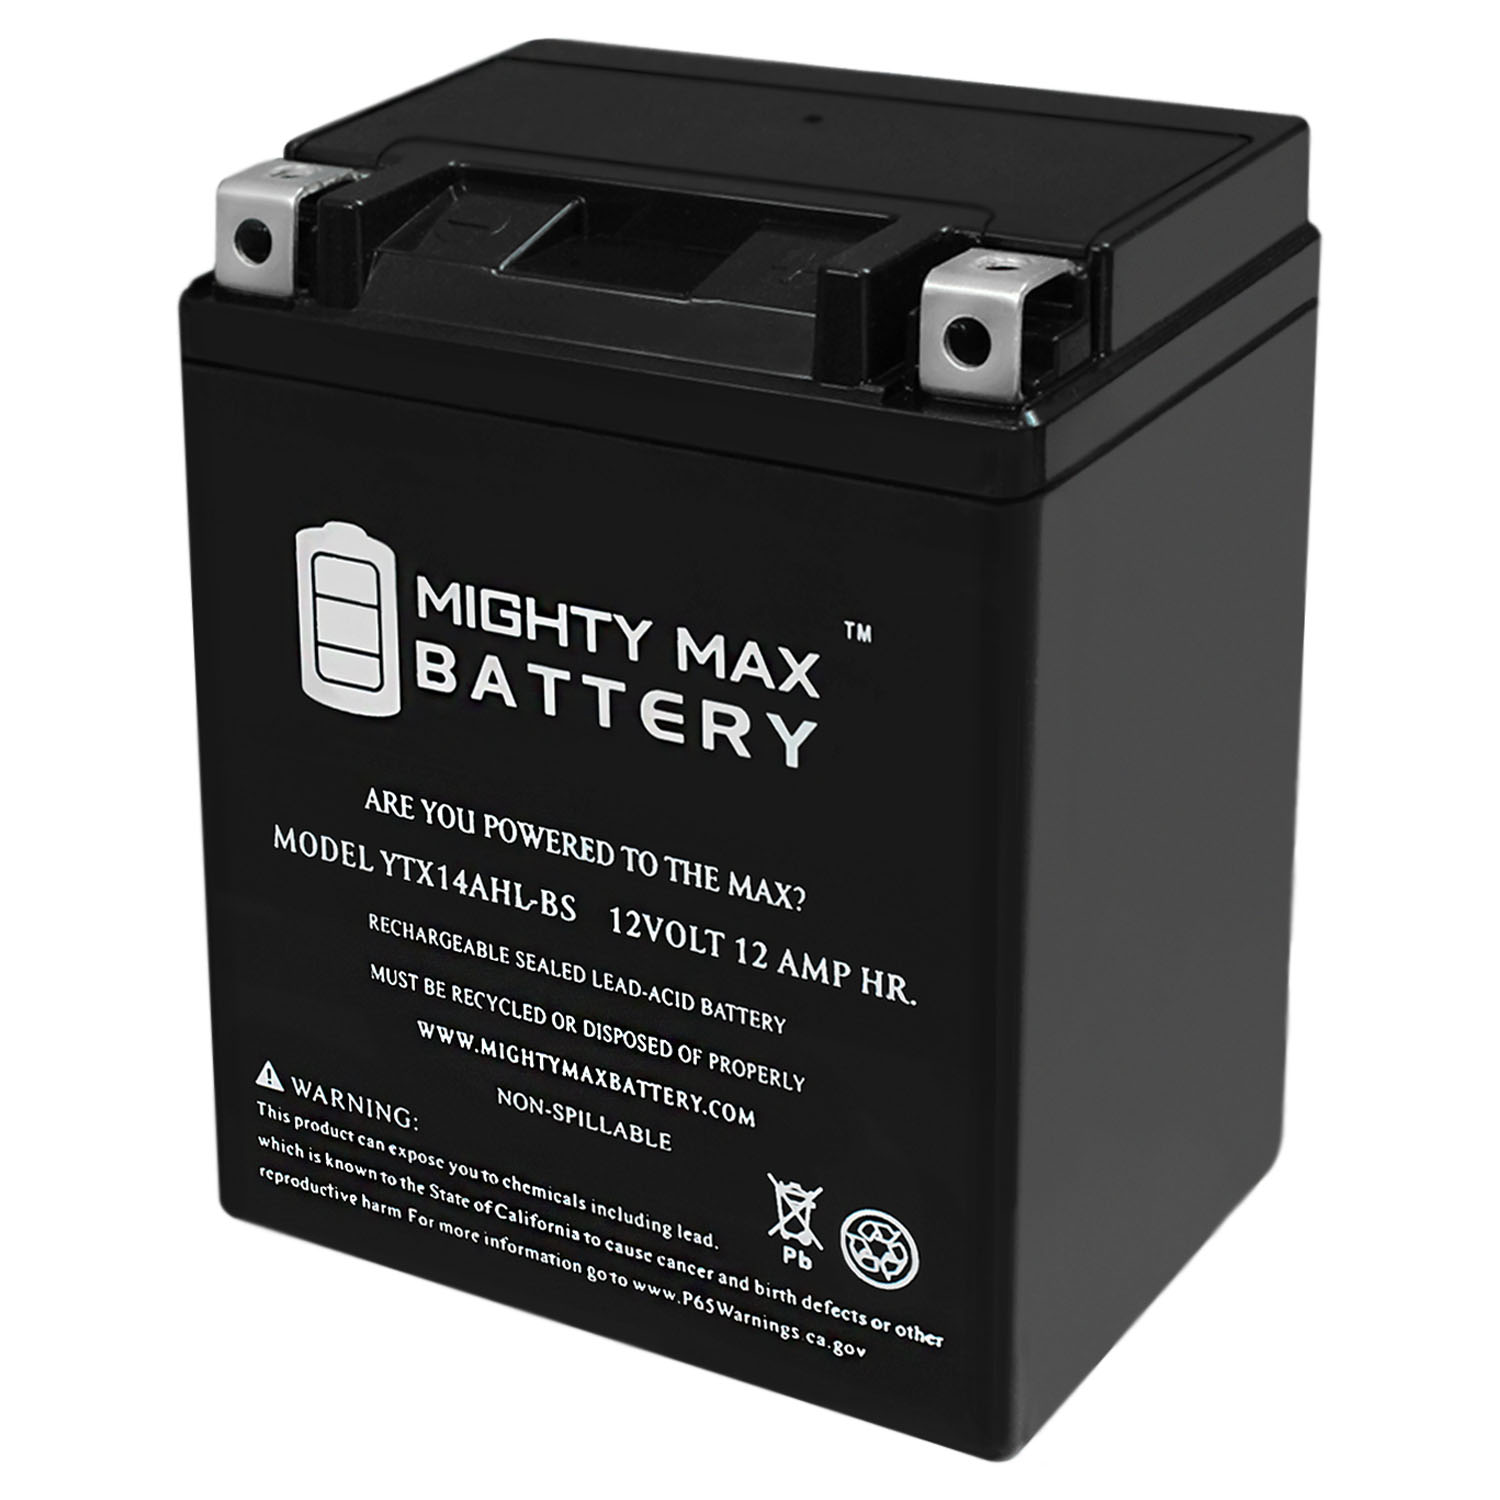 YTX14AHL 12V 12Ah Battery Replaces Lithium ION ATV Motorcycle Racing